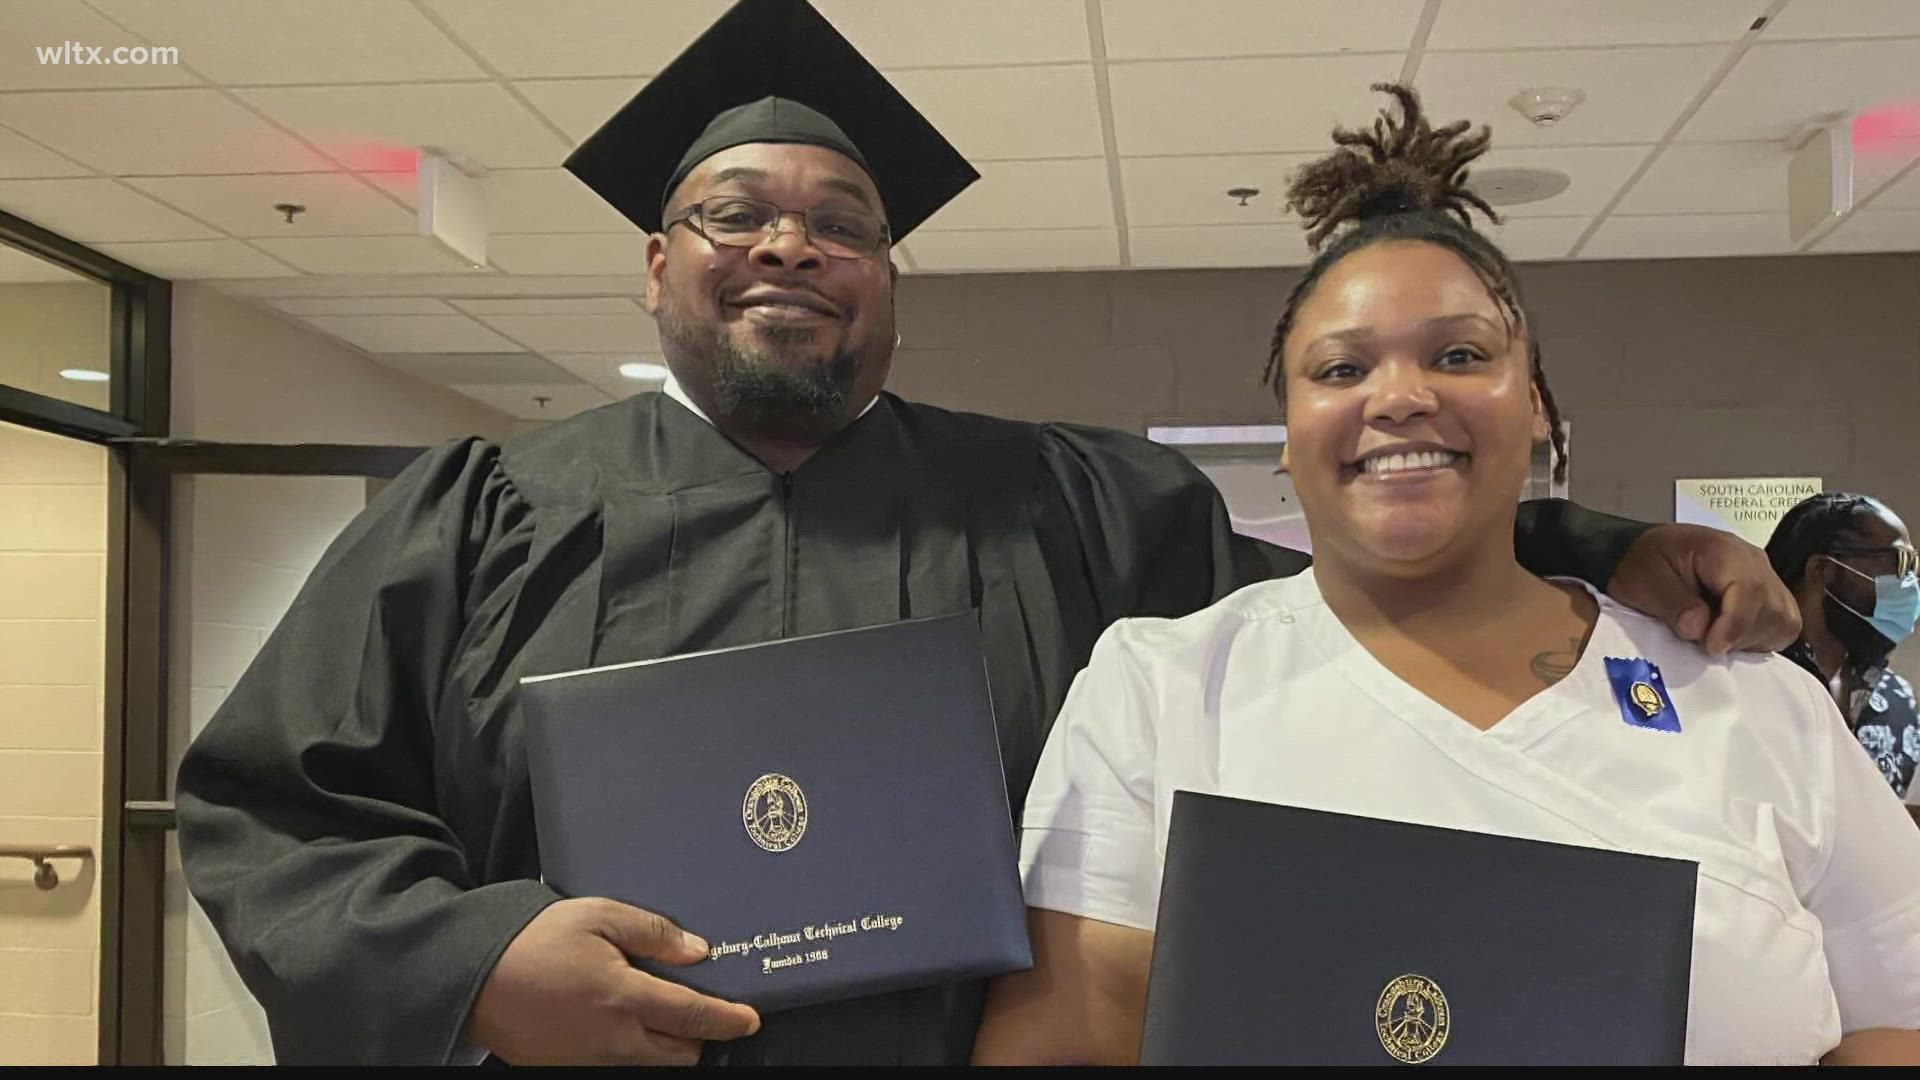 Raymond and Keiosha Hamilton graduated together from Orangeburg Calhoun Technical College after two years of working on their respective degrees.